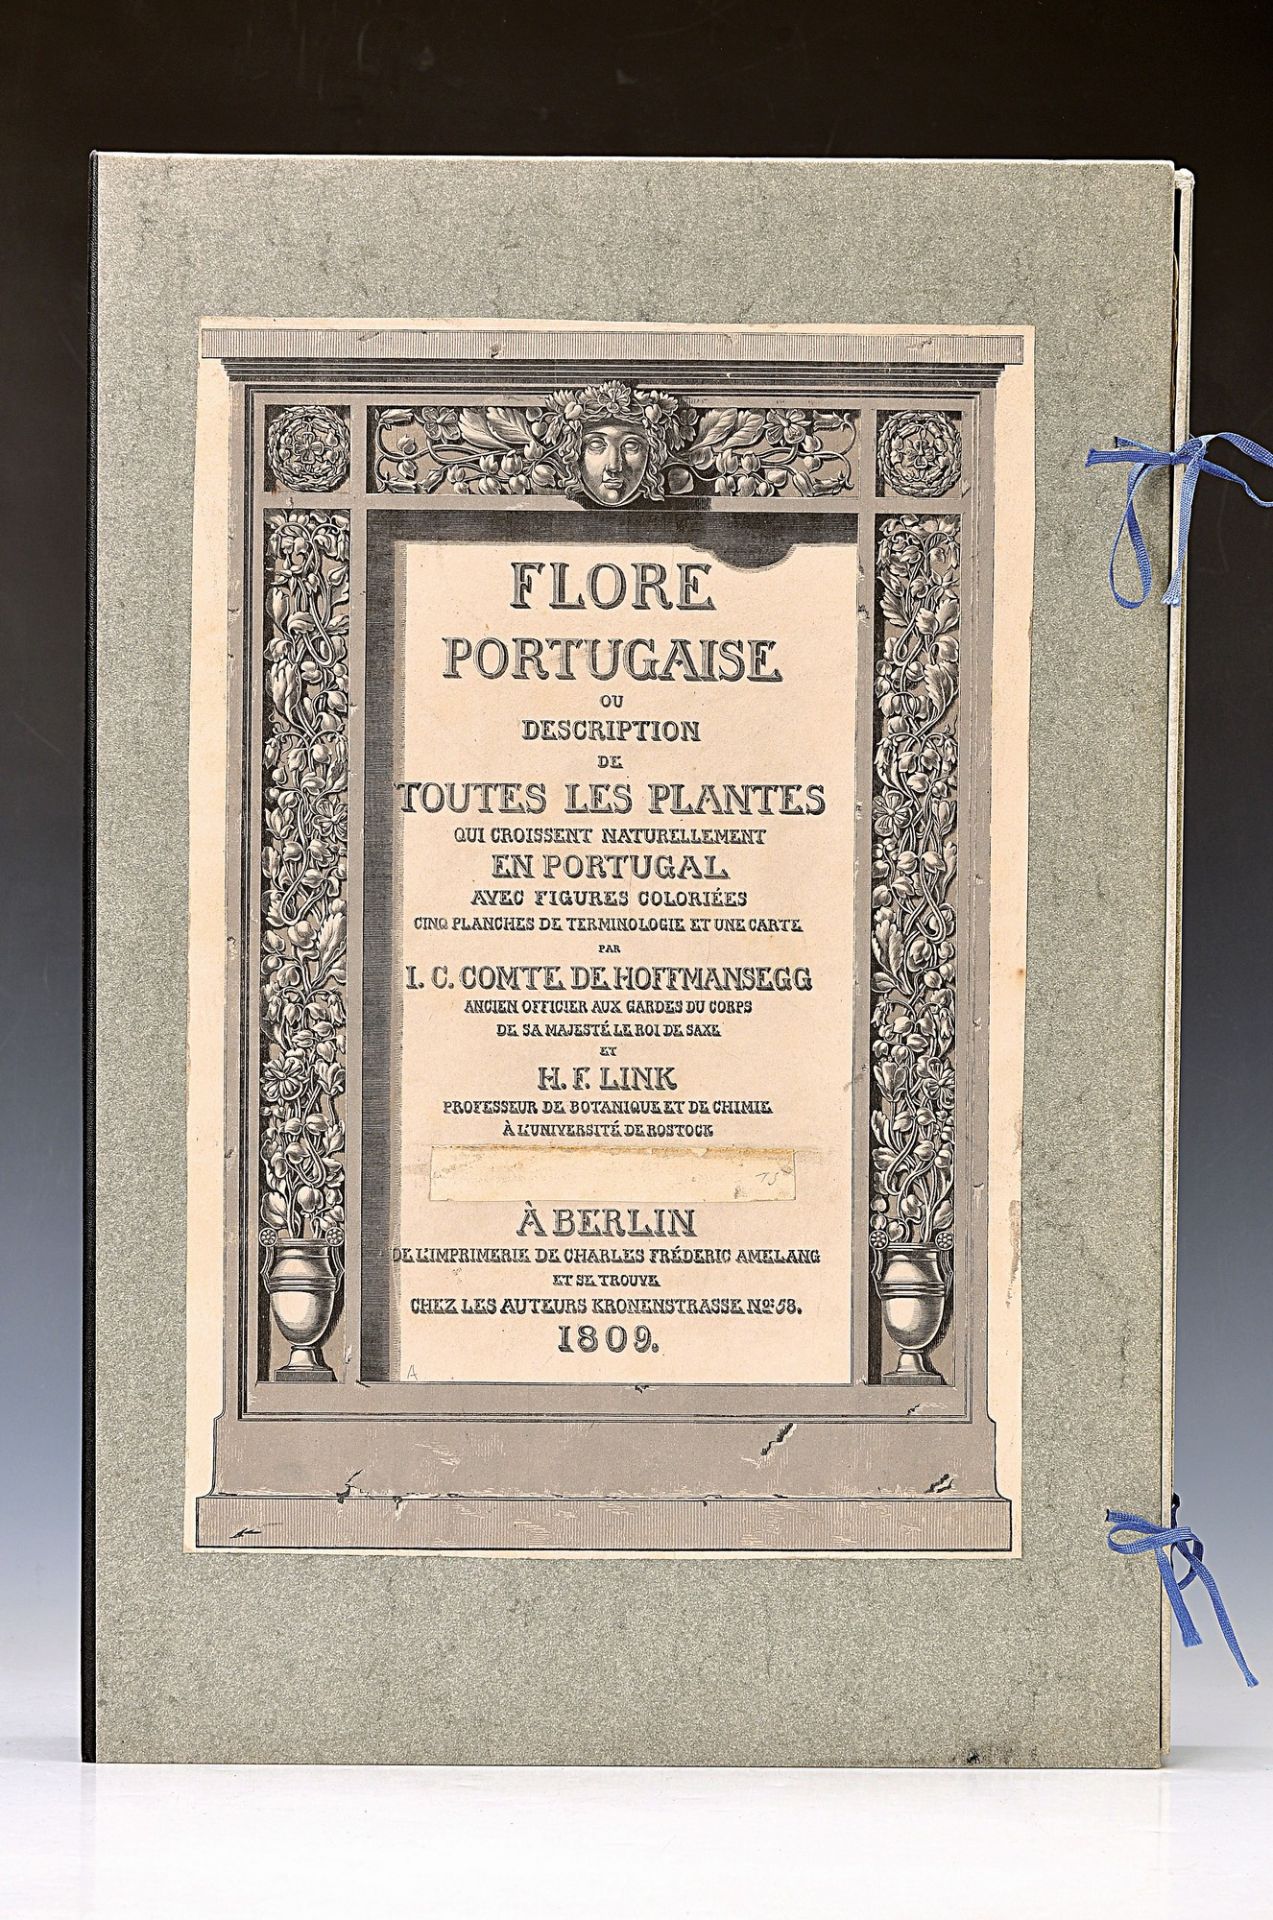 J.C. Hoffmannsegg and H.F. Link: Flore portugaise, Berlin 1809-1840, 23 Lief. in fourvolumes with